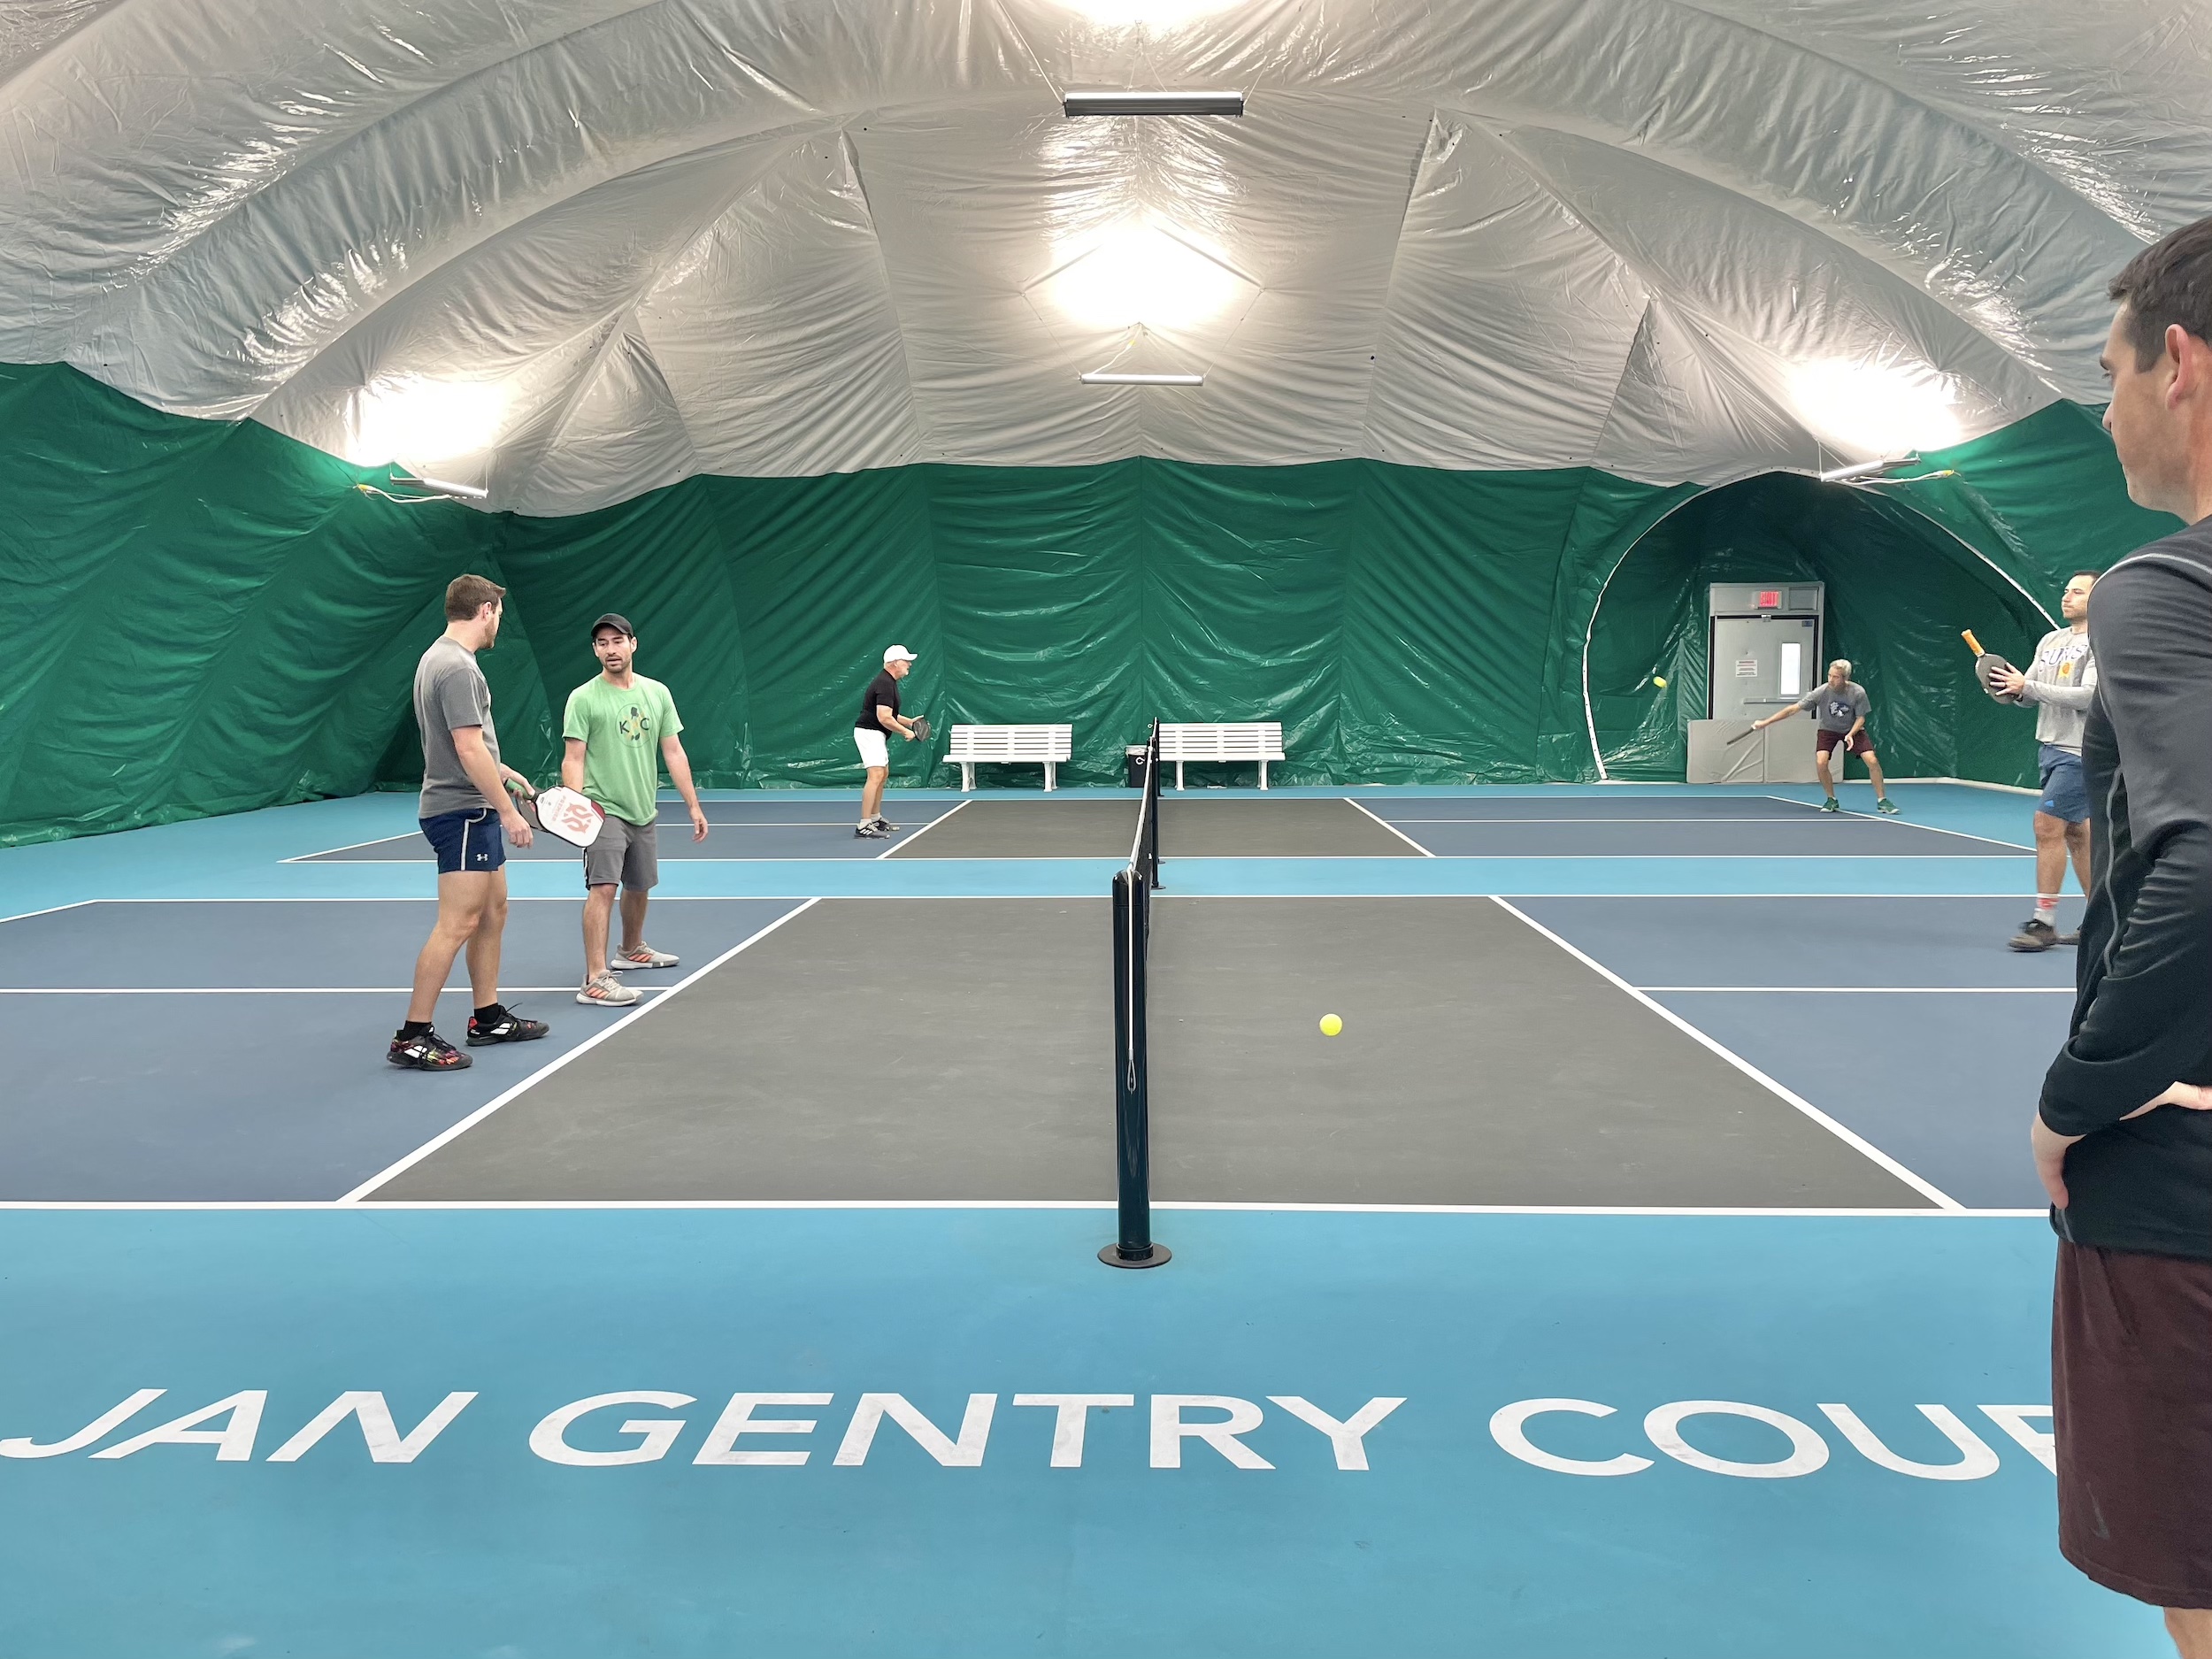 Leagues Overland Park Elite Tennis and Wellness